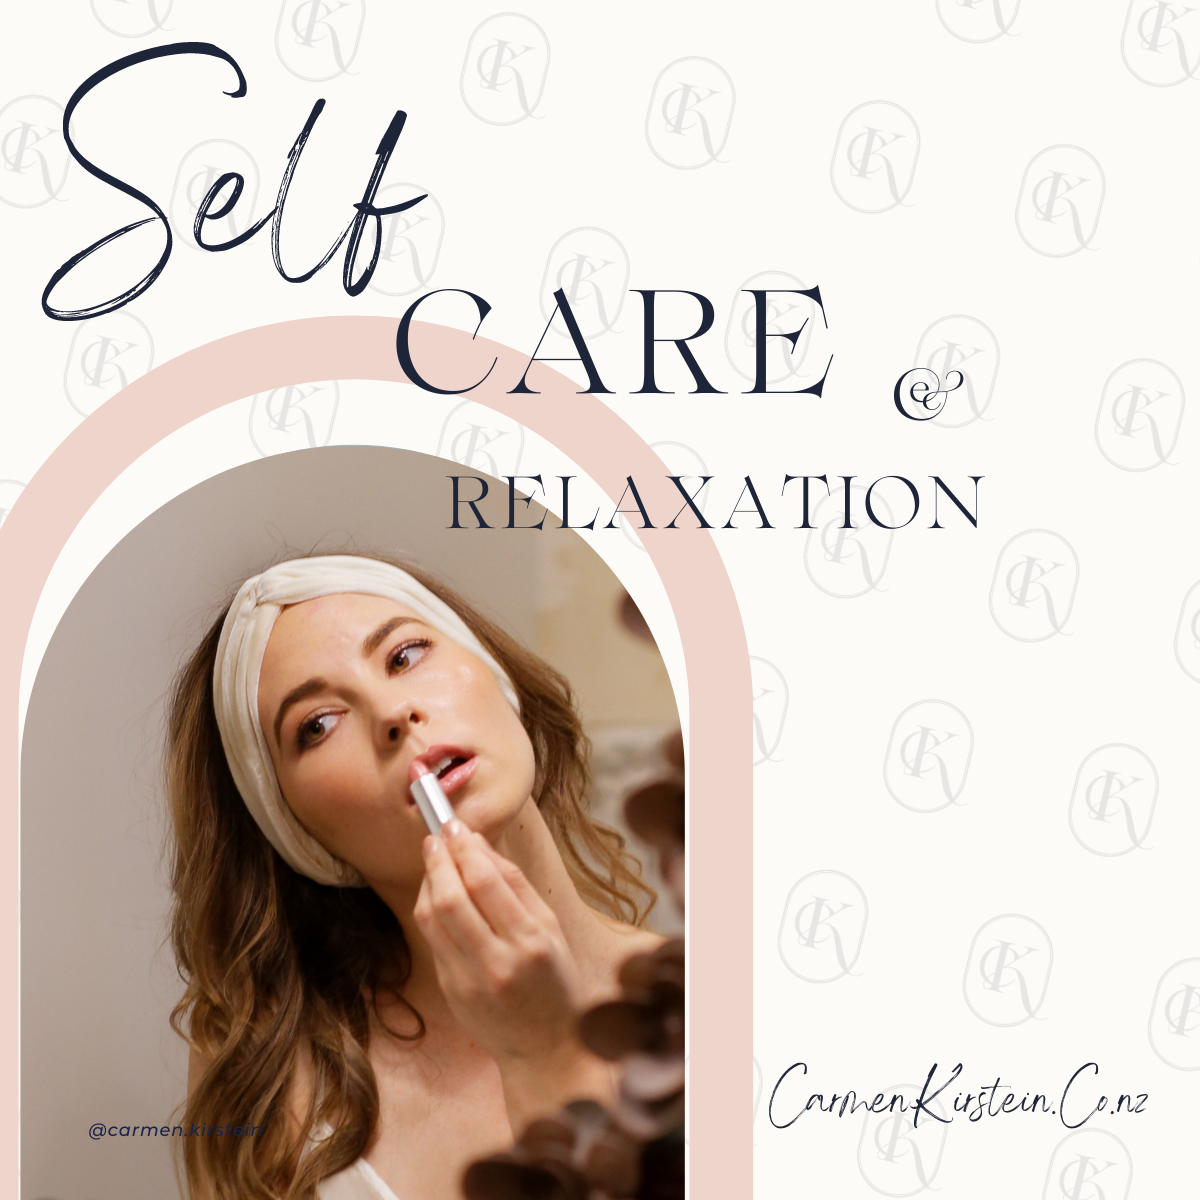 Self Care & Relaxation Checklist